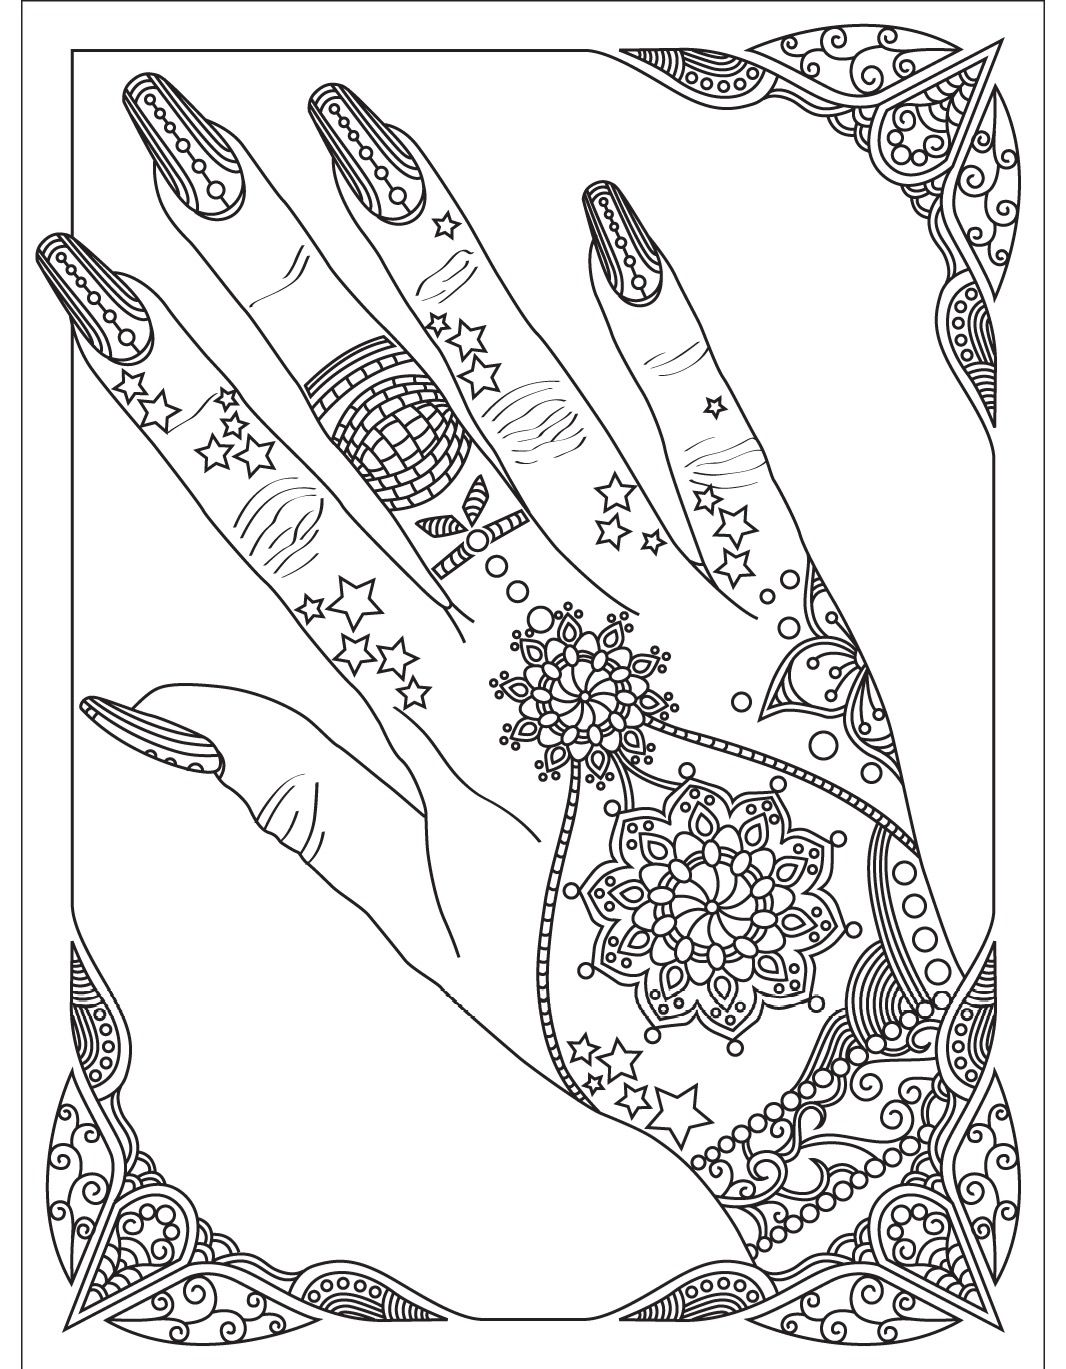 Nails | Colorish: coloring book app for adults by GoodSoftTech | Coloring  book app, Coloring books, Cute coloring pages